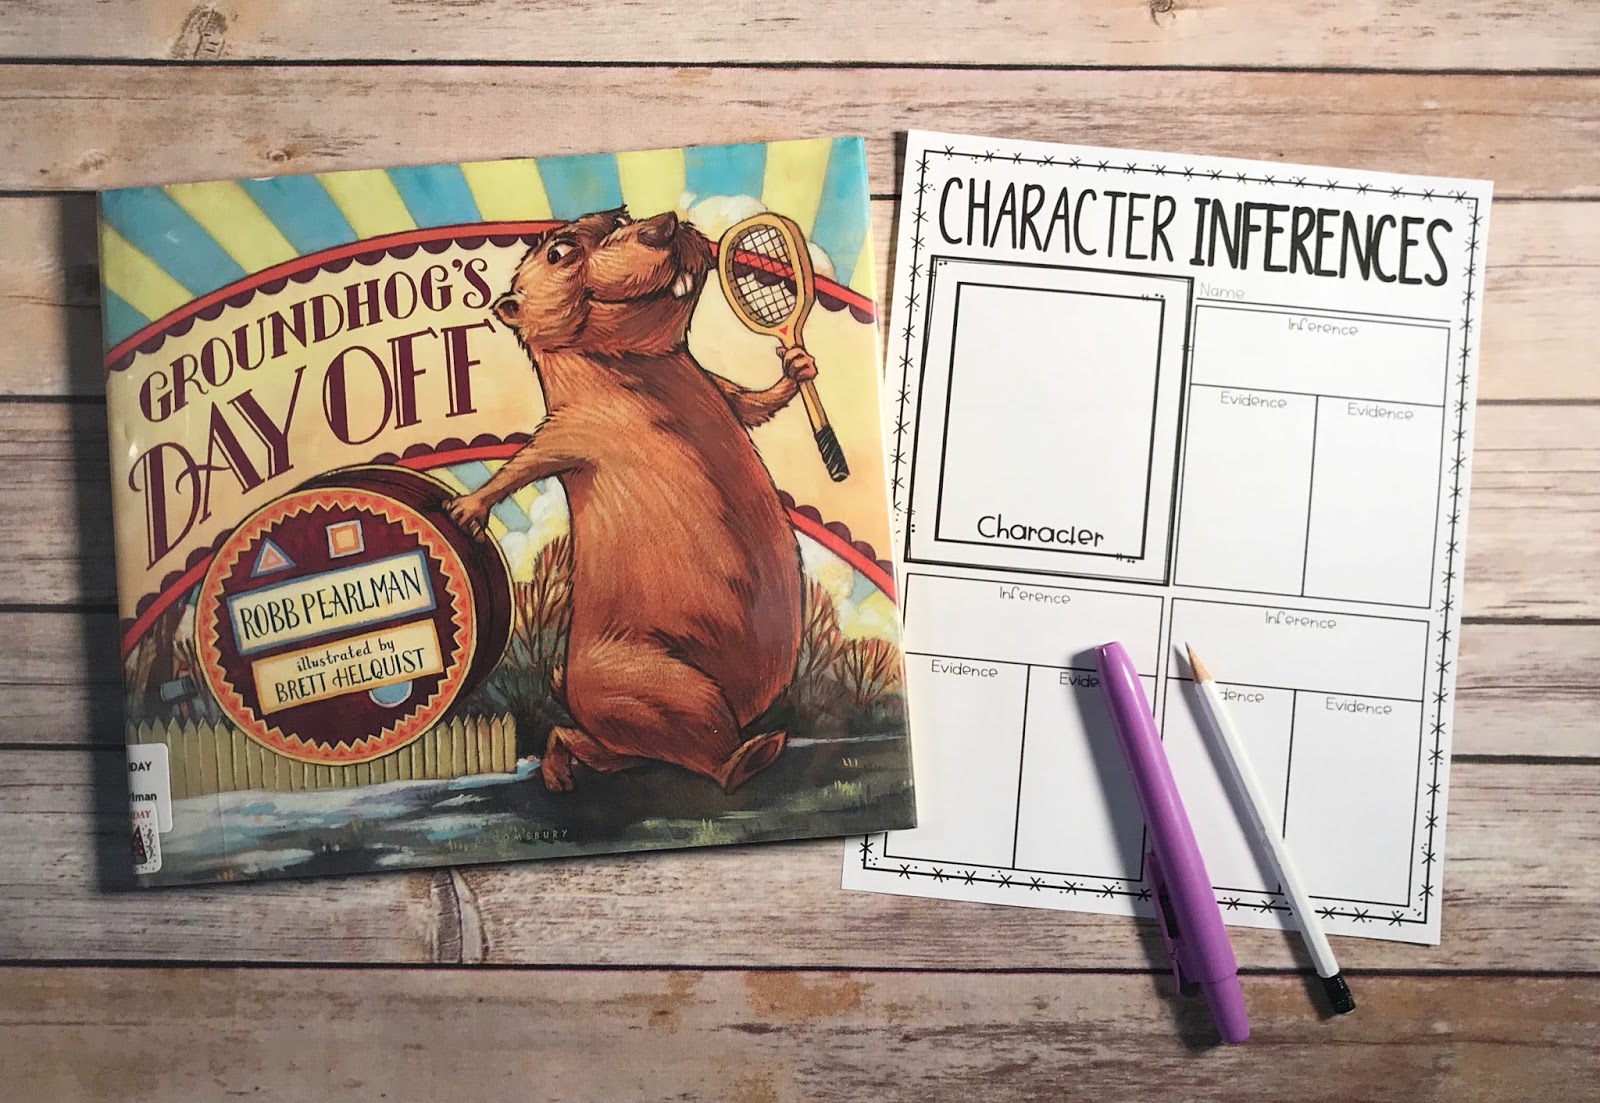 Using Mentor texts is fun way to teach or review reading comprehension to upper elementary students. These digital and printable graphic organizers are a fun way to engage , whether you utilize mentor texts in centers, small groups or the whole class. 3rd, 4th, and 5th graders will enjoy a read aloud while strengthening their comprehension of story theme, character inferences, making predictions, and exploring cause and effect. {third, fourth, fifth grade, digital, printable}